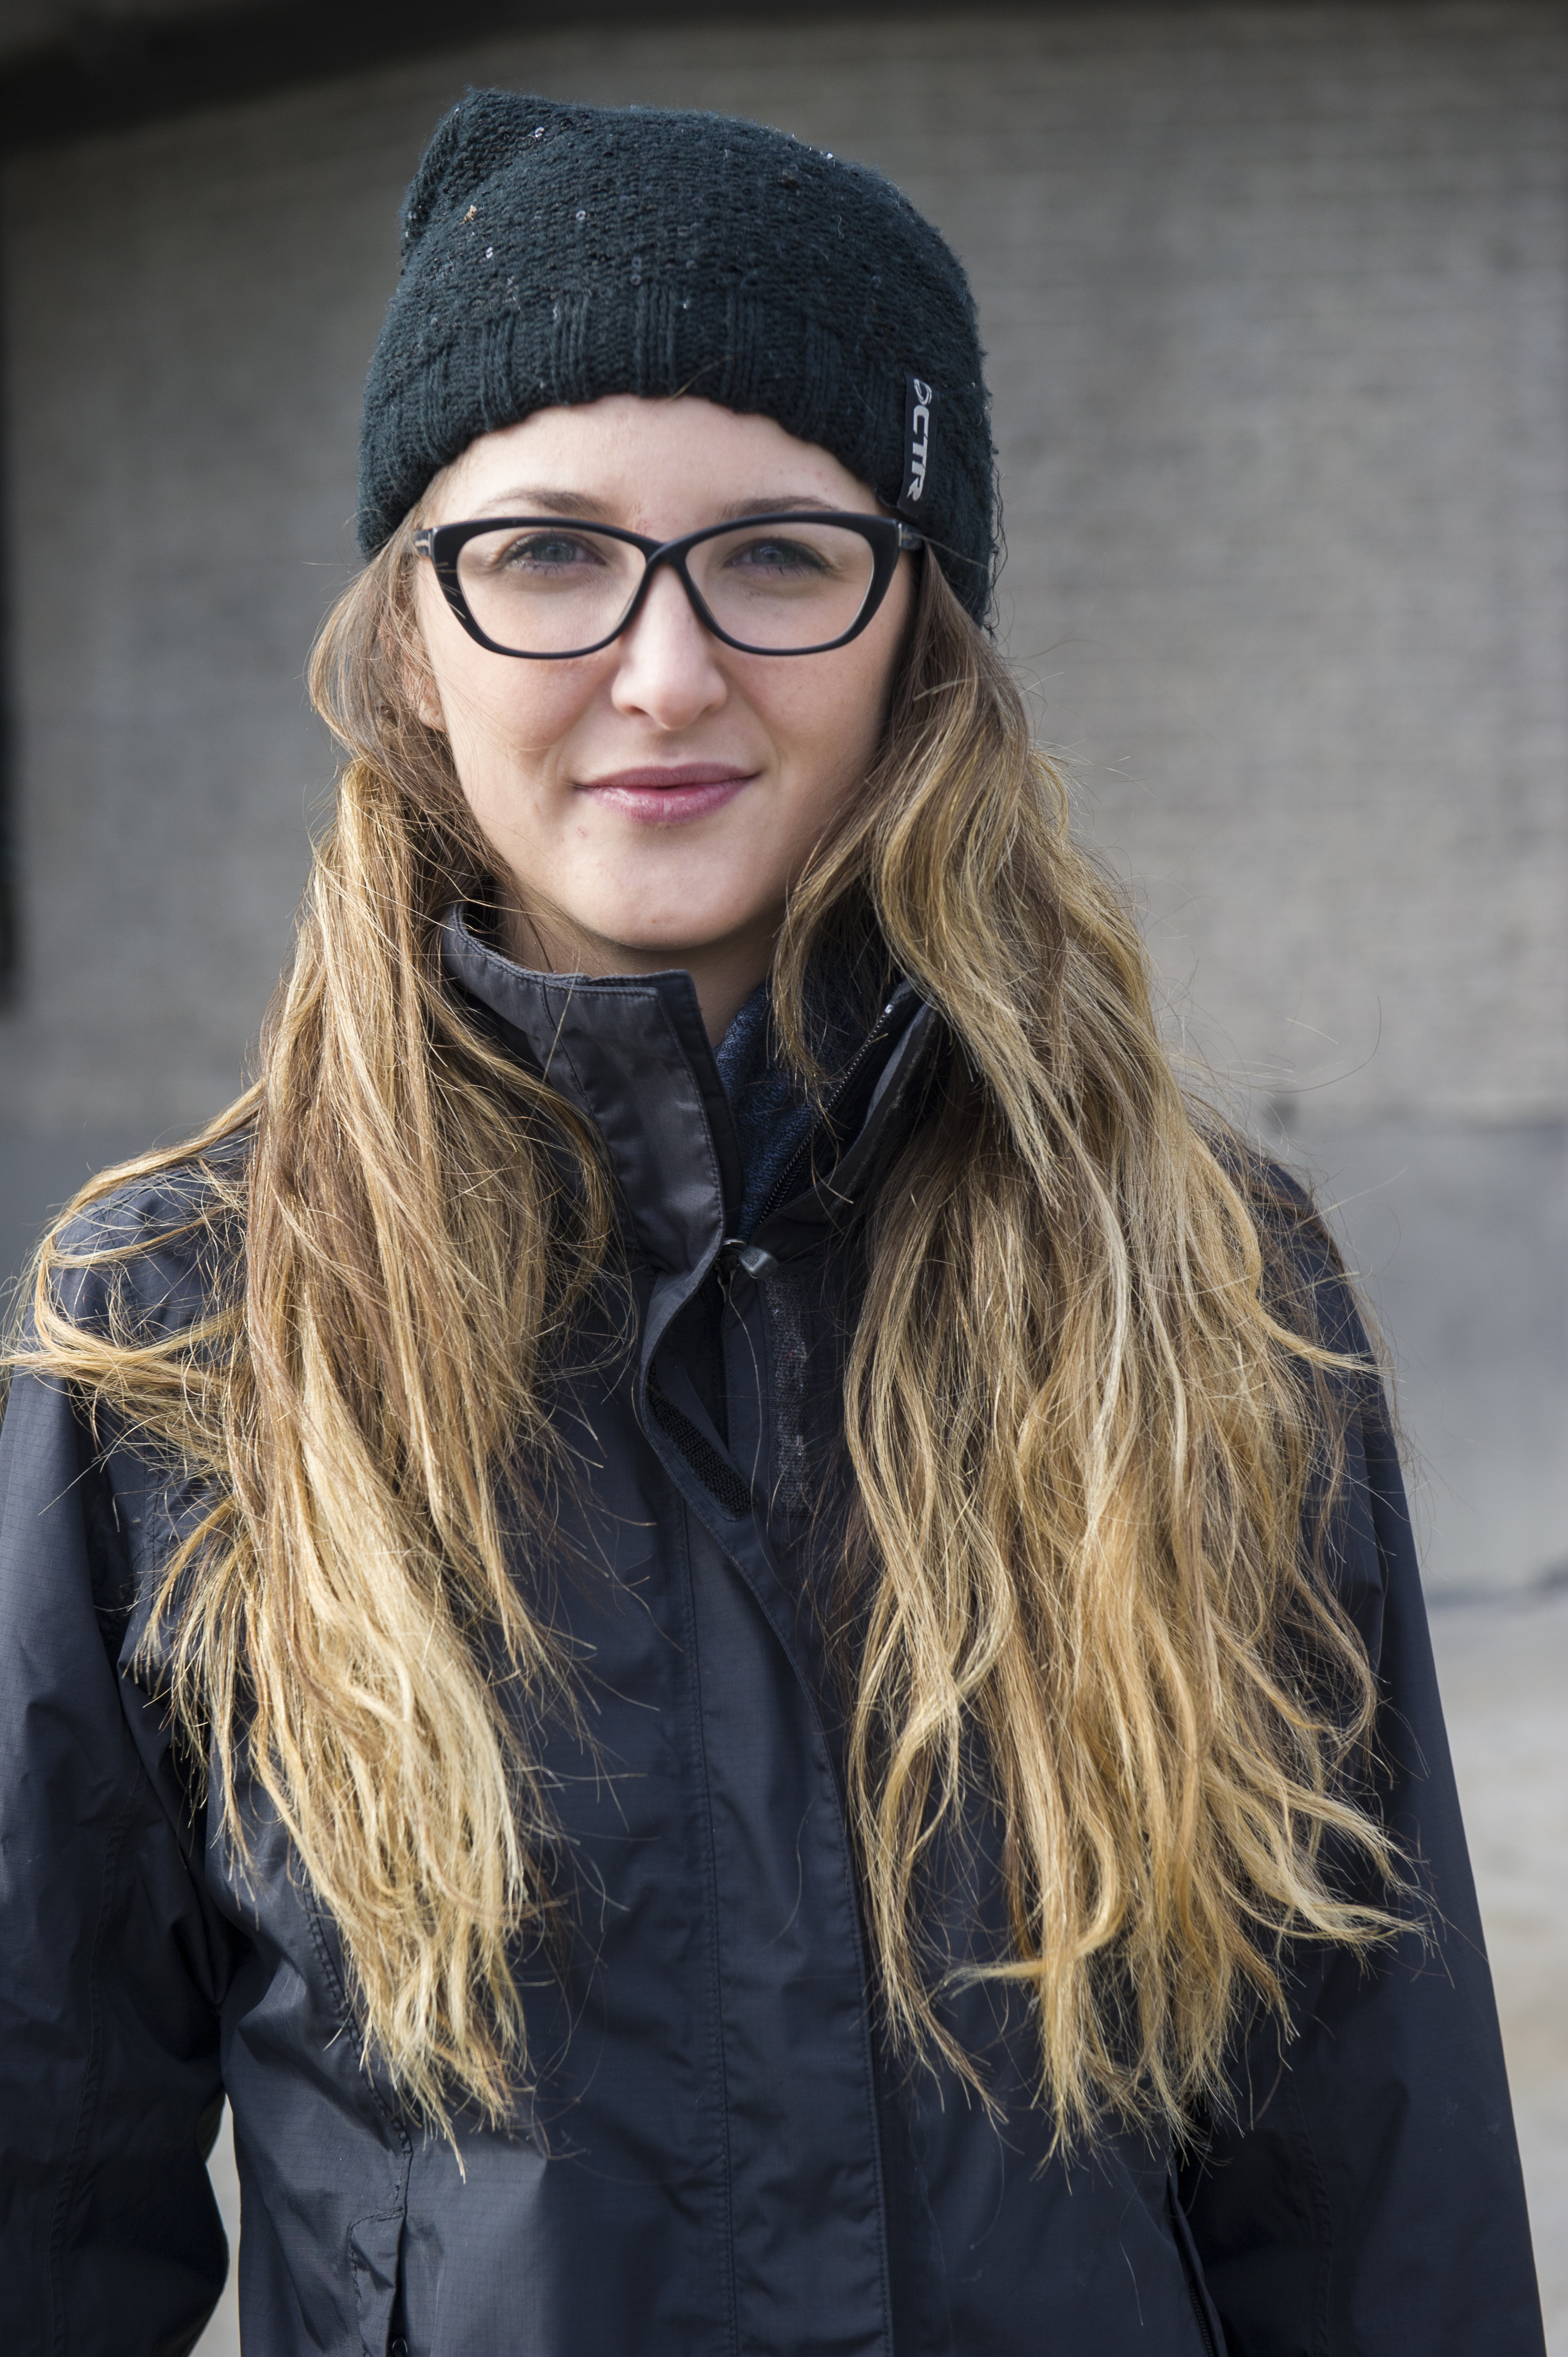 Cora MacDonald is a 29-year-old journalism student who works as a radio producer. Photo by Andrej Ivanov.